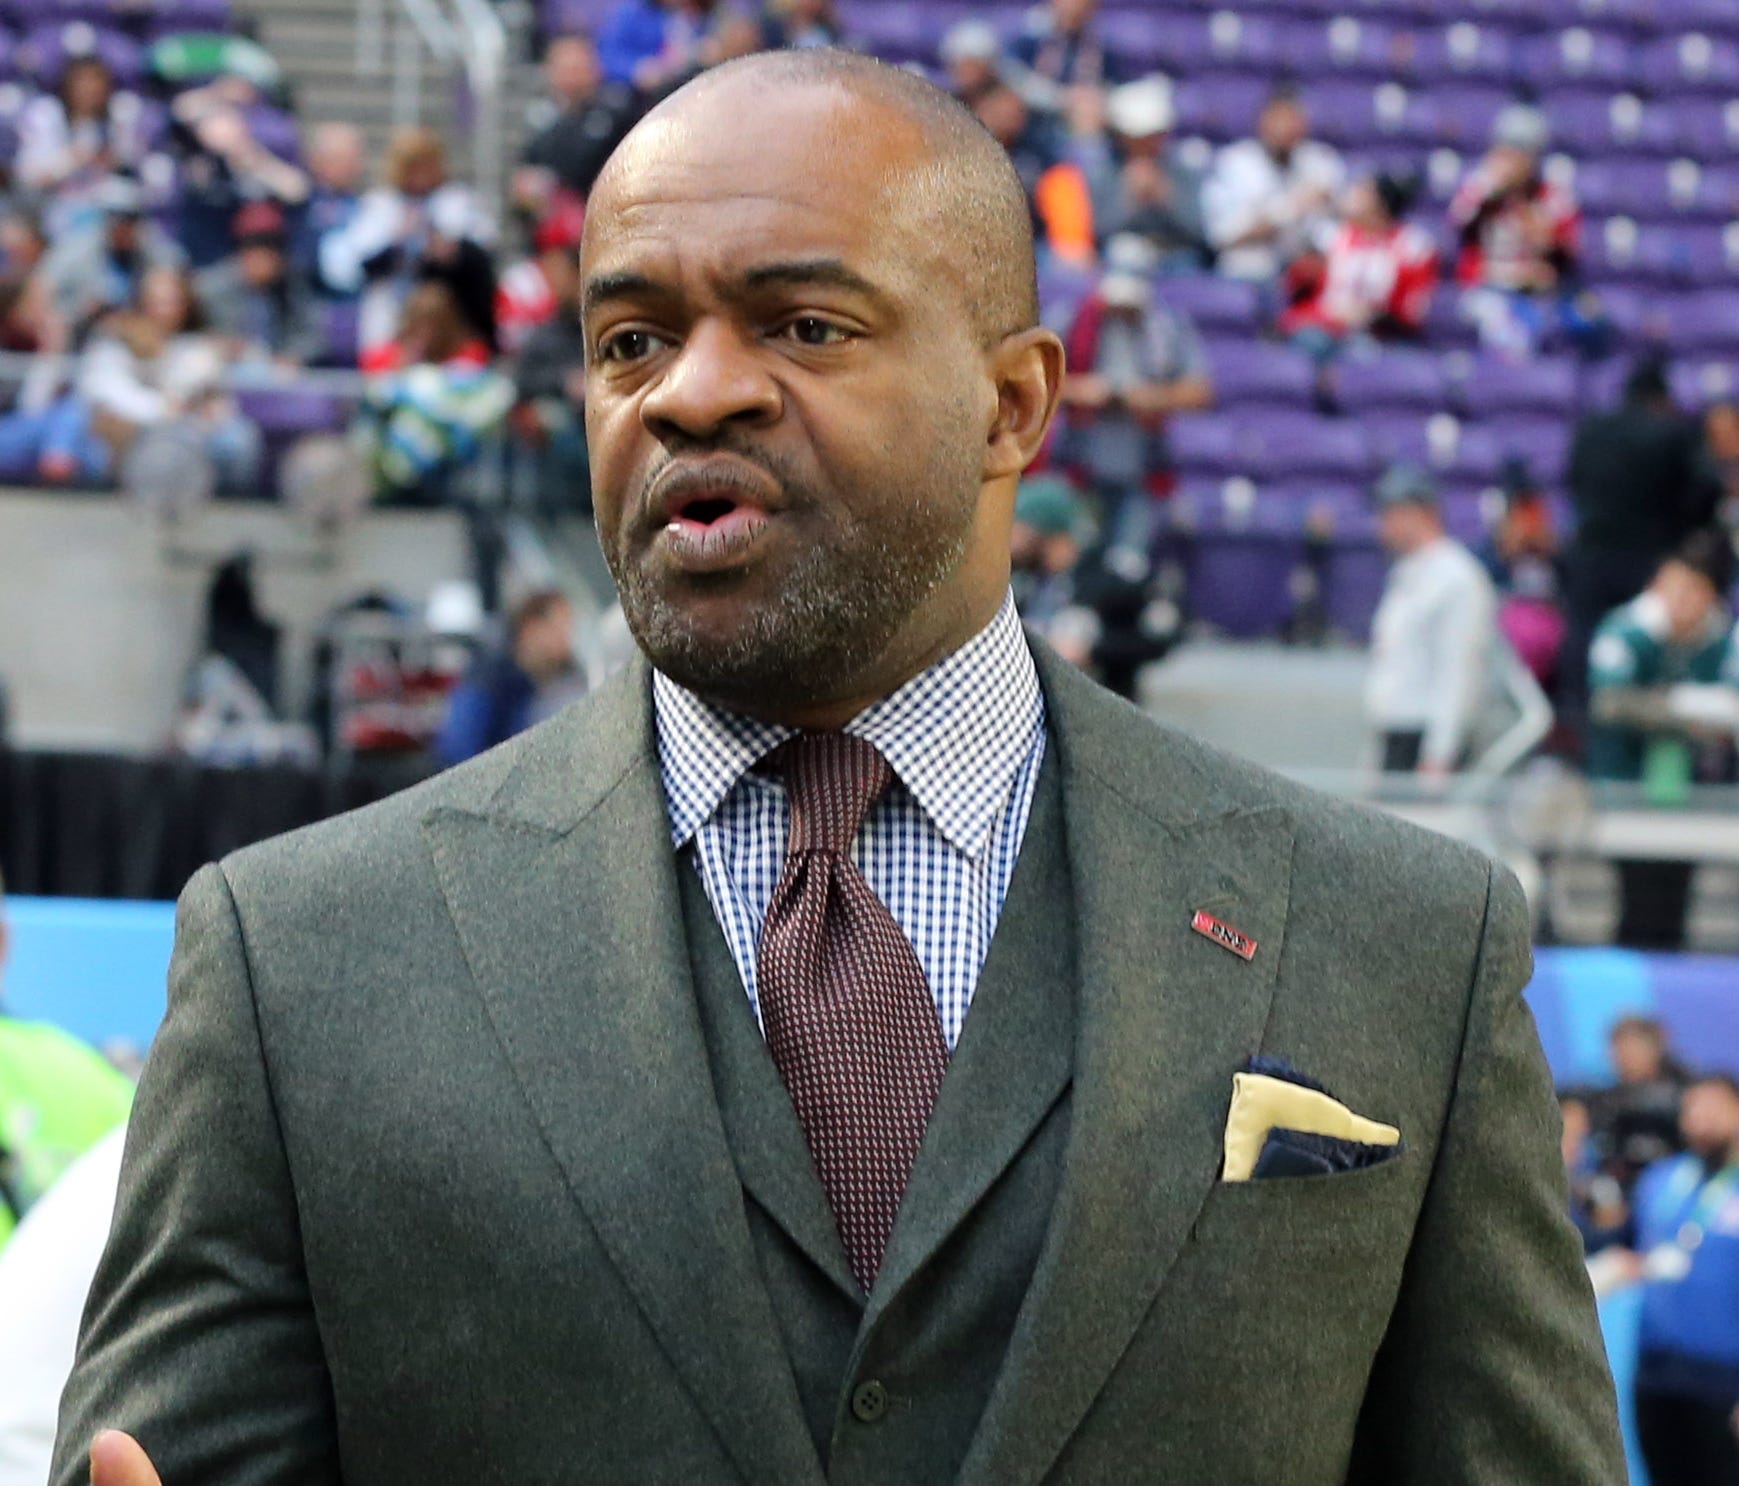 DeMaurice Smith has been executive director of the NFLPA since 2009.